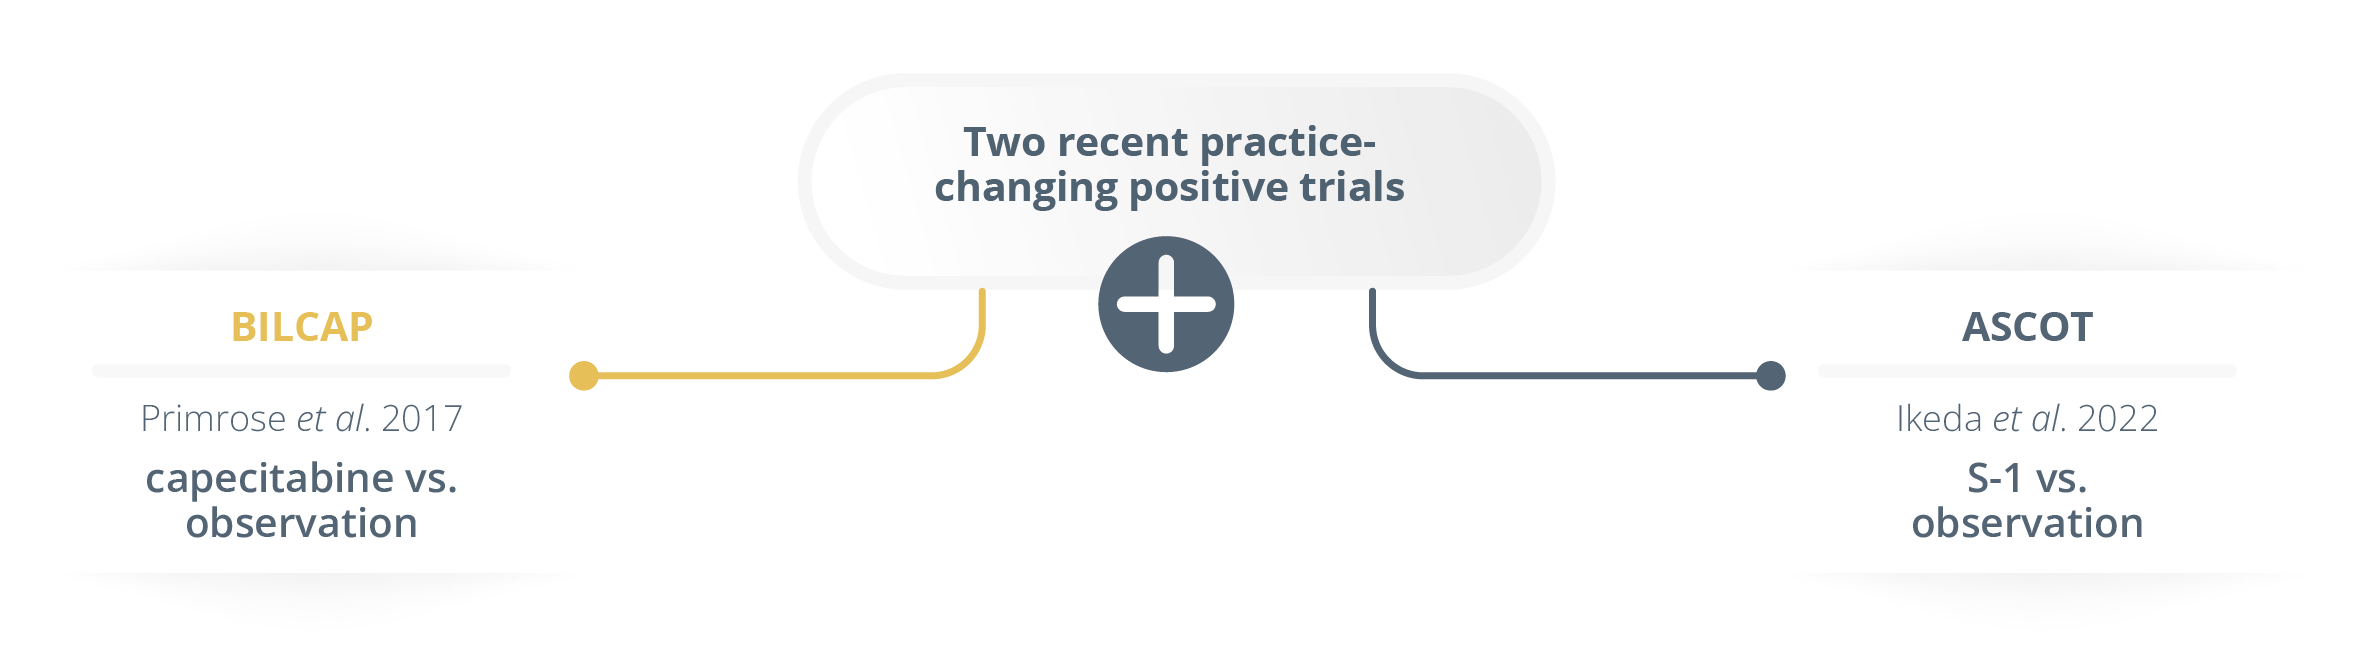 The BICAP and ASCOT trials were two practice-changing positive trials